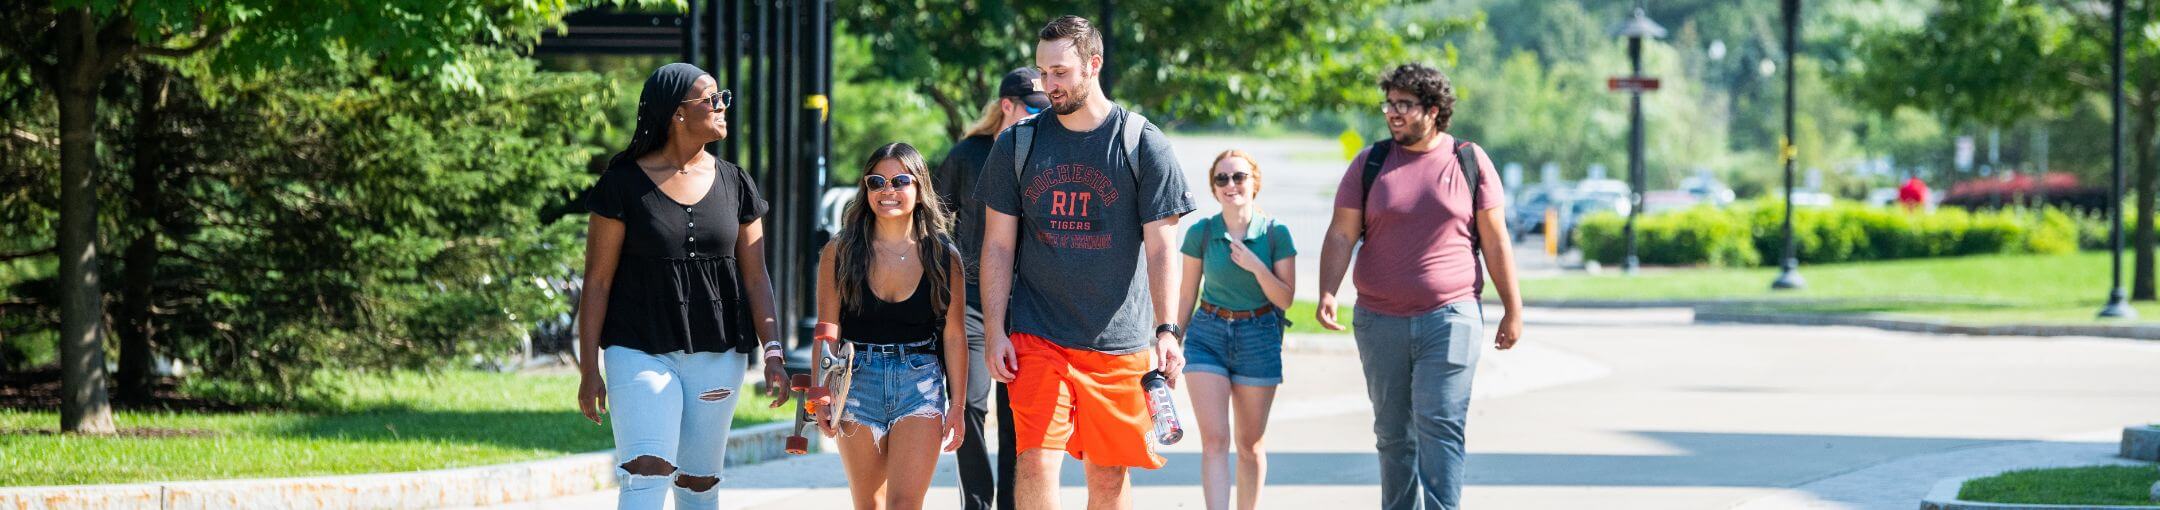 A group of students walking on one of the walkways of the R I T campus.